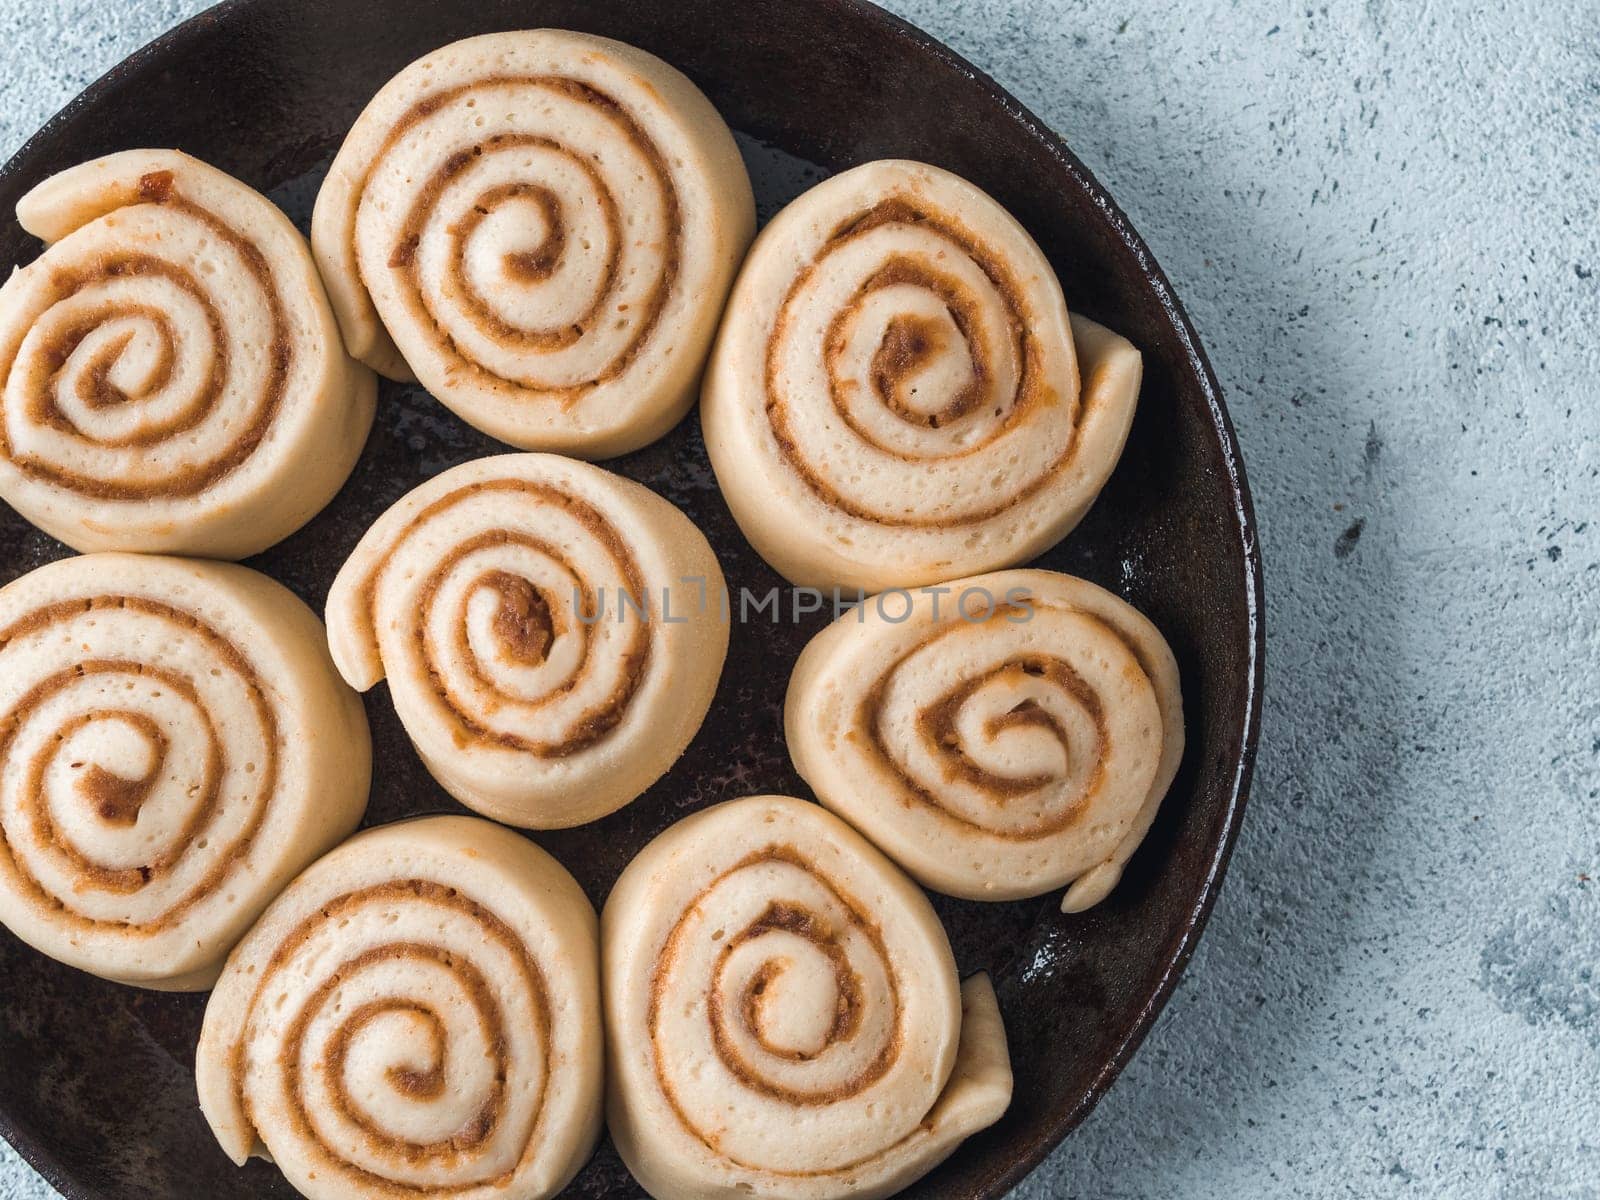 Raw dough preparation swedish cinnamon buns Kanelbullar with pumpkin spice ready to bake.Idea and recipe pastries - perfect cinnamon rolls,top view in skillet.Flat lay.Copy space for text